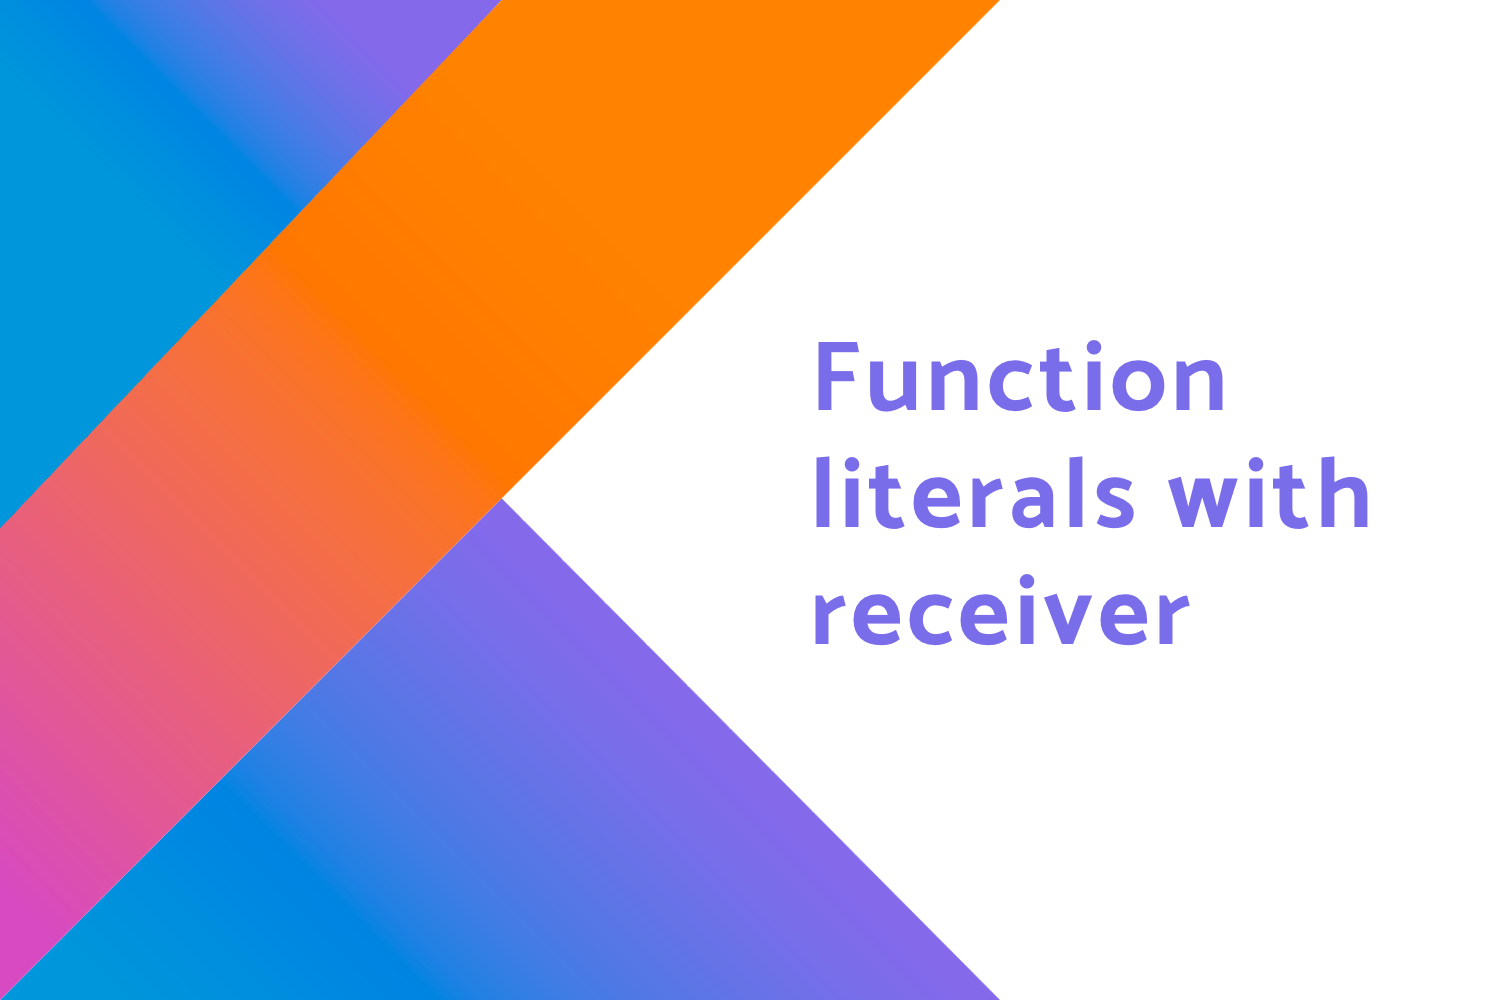 Function literals with receiver in Kotlin